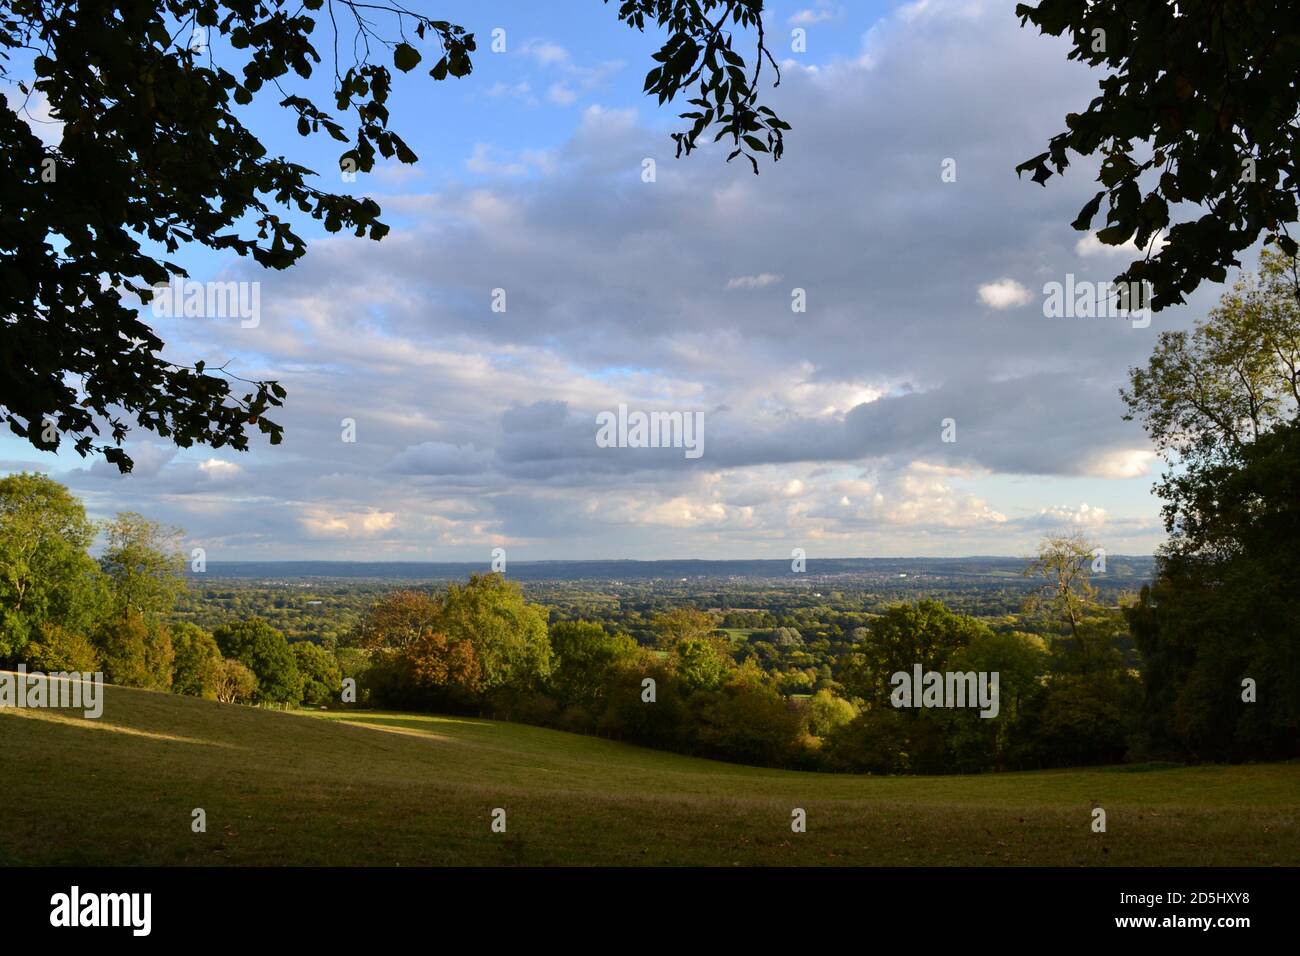 Looking down on Weald of Kent from the Greensand Ridge near Underriver, Sevenoaks, October. Stock Photo